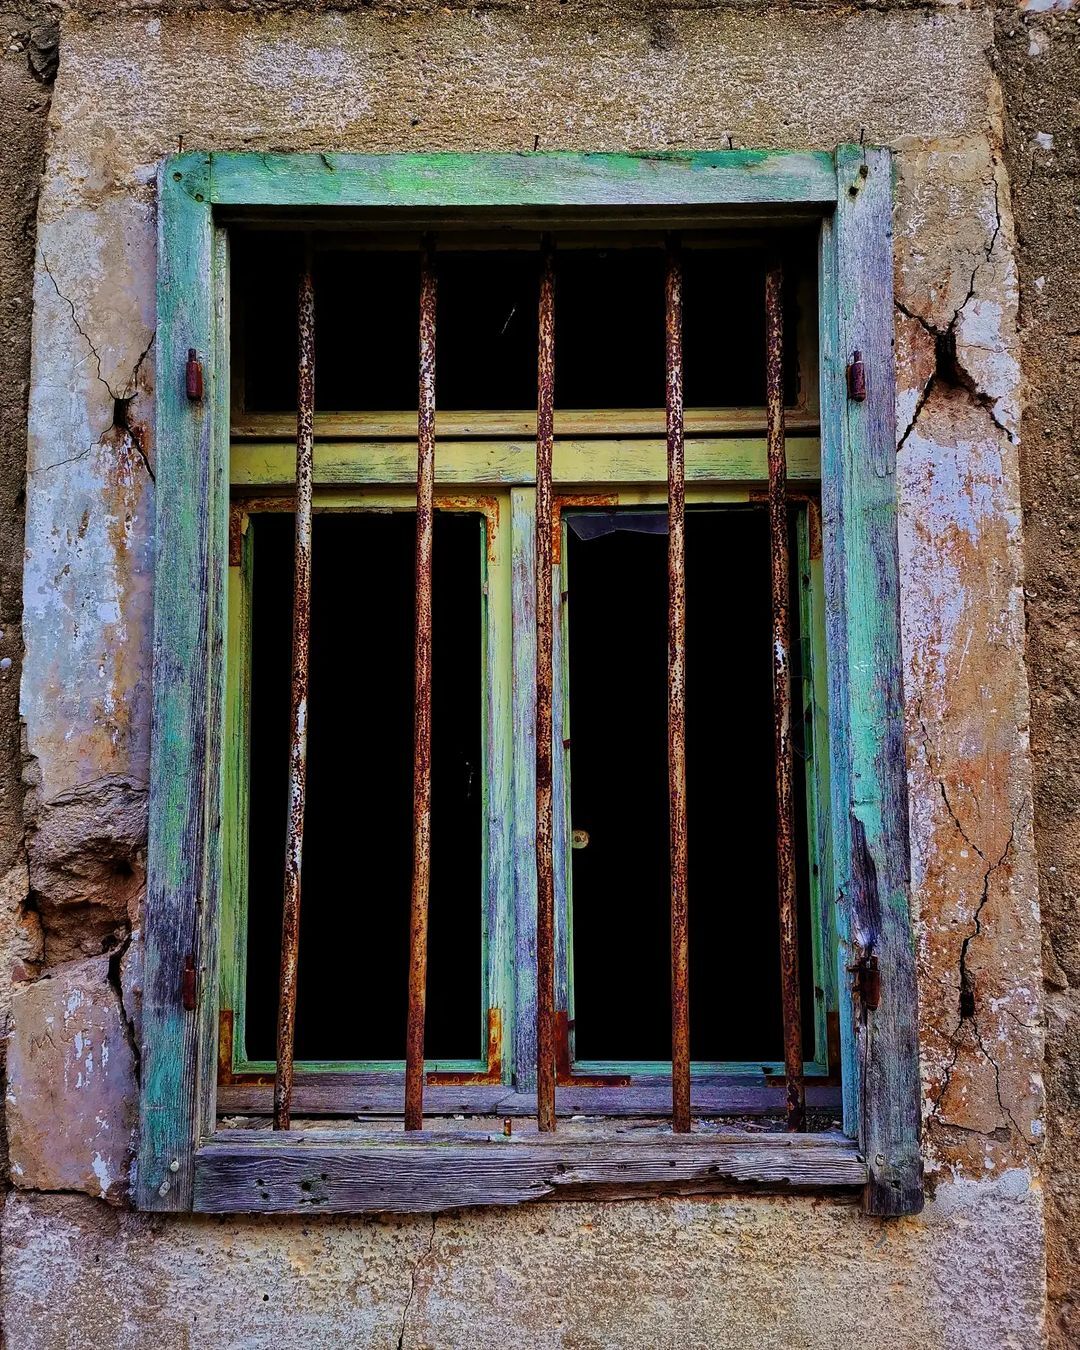 A window eaten by rust and salt, but still colorful